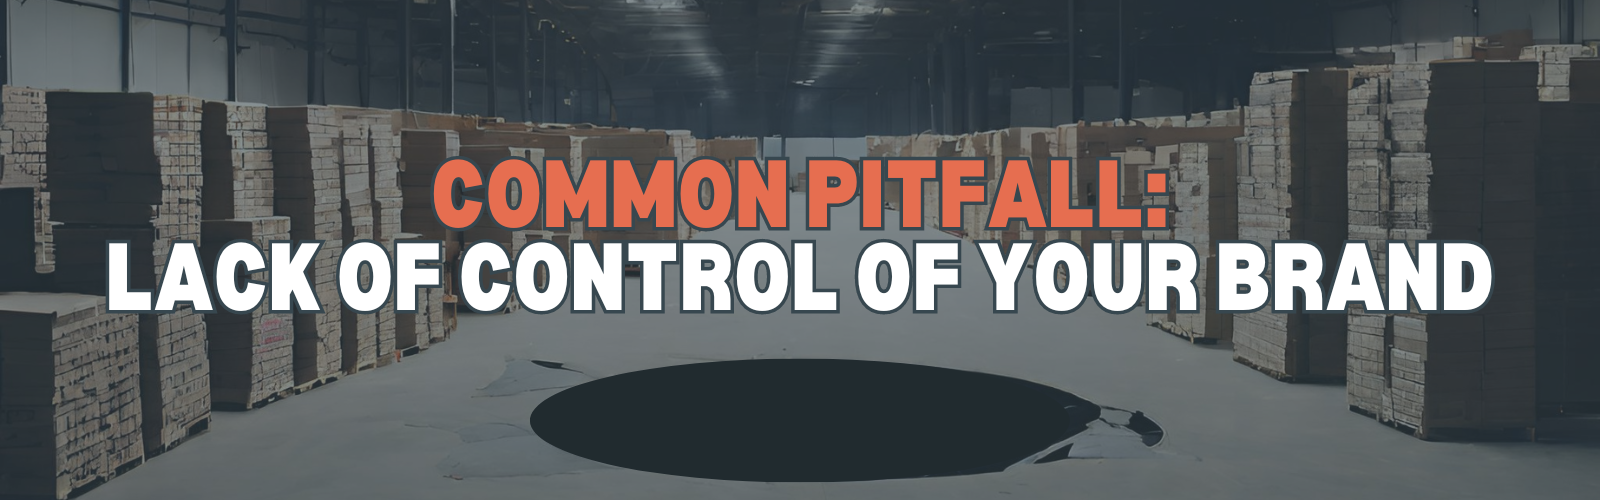 Amazon FBA - Common Pitfall - Lack of Control Of Your Brand